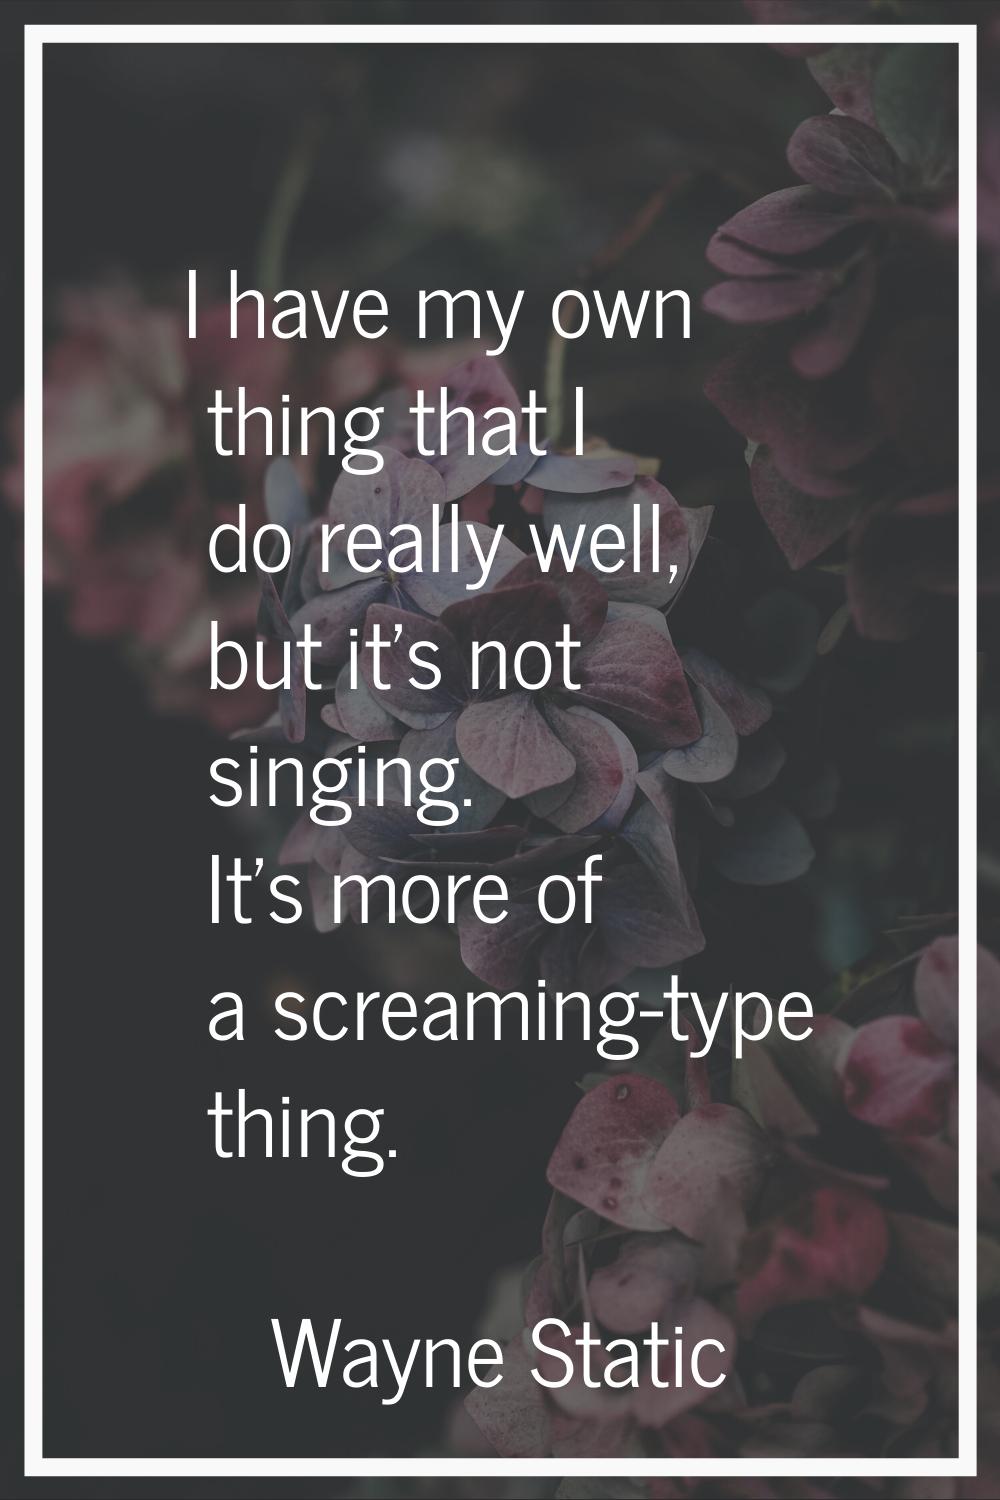 I have my own thing that I do really well, but it's not singing. It's more of a screaming-type thin